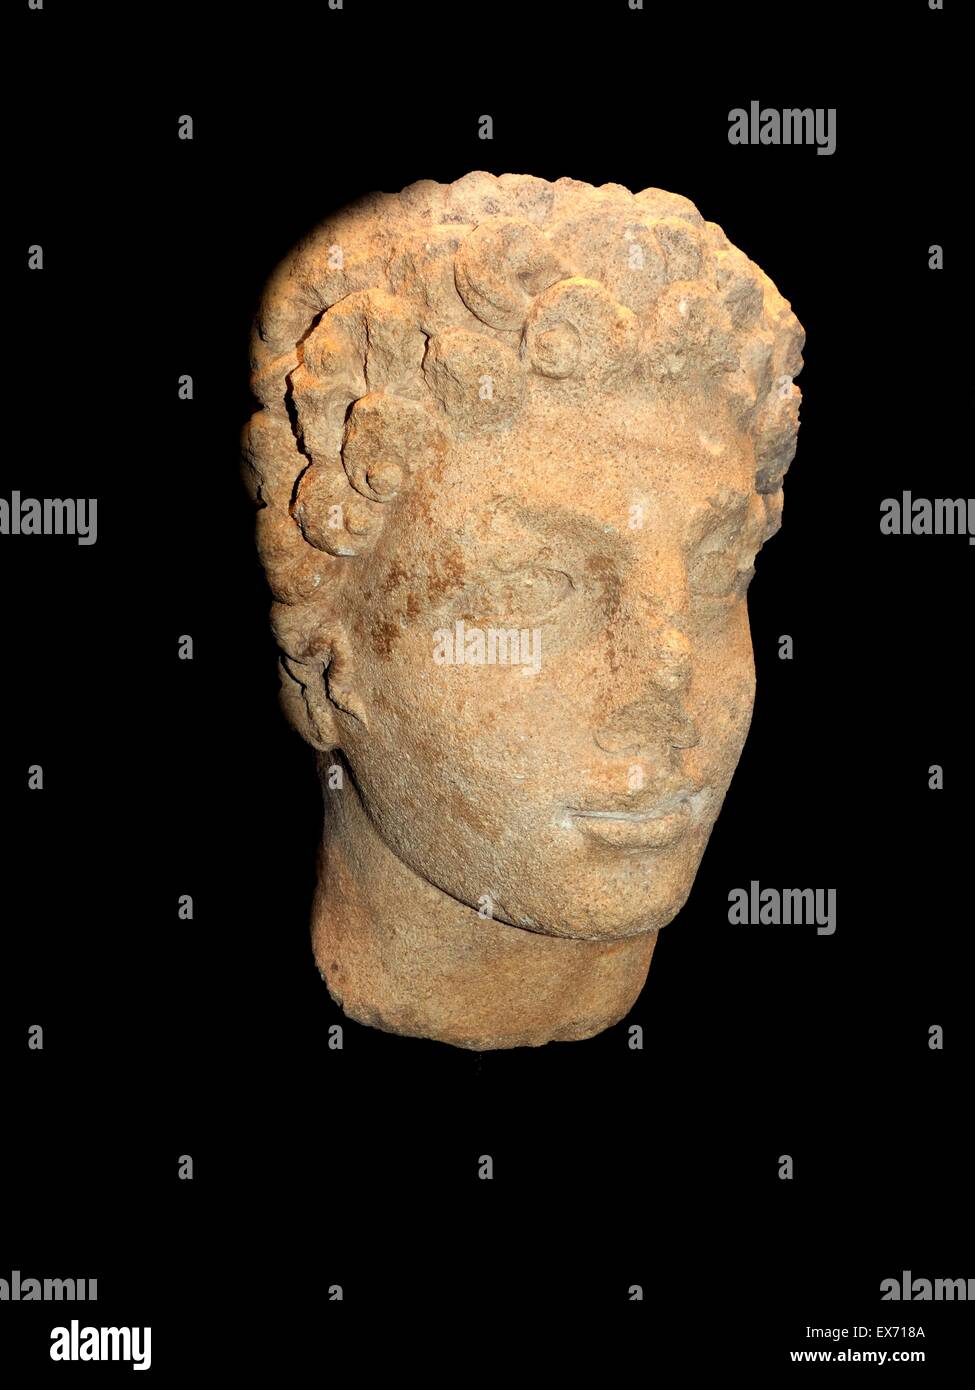 The Uley Mercury, Roman Britain, 2nd century AD. From Uley, Gloucestershire. cult-statue of the god Mercury which stood in the Uley temple. found in the 1979 season of work, had been carefully buried in the post-Roman phase of the buildings. Stock Photo